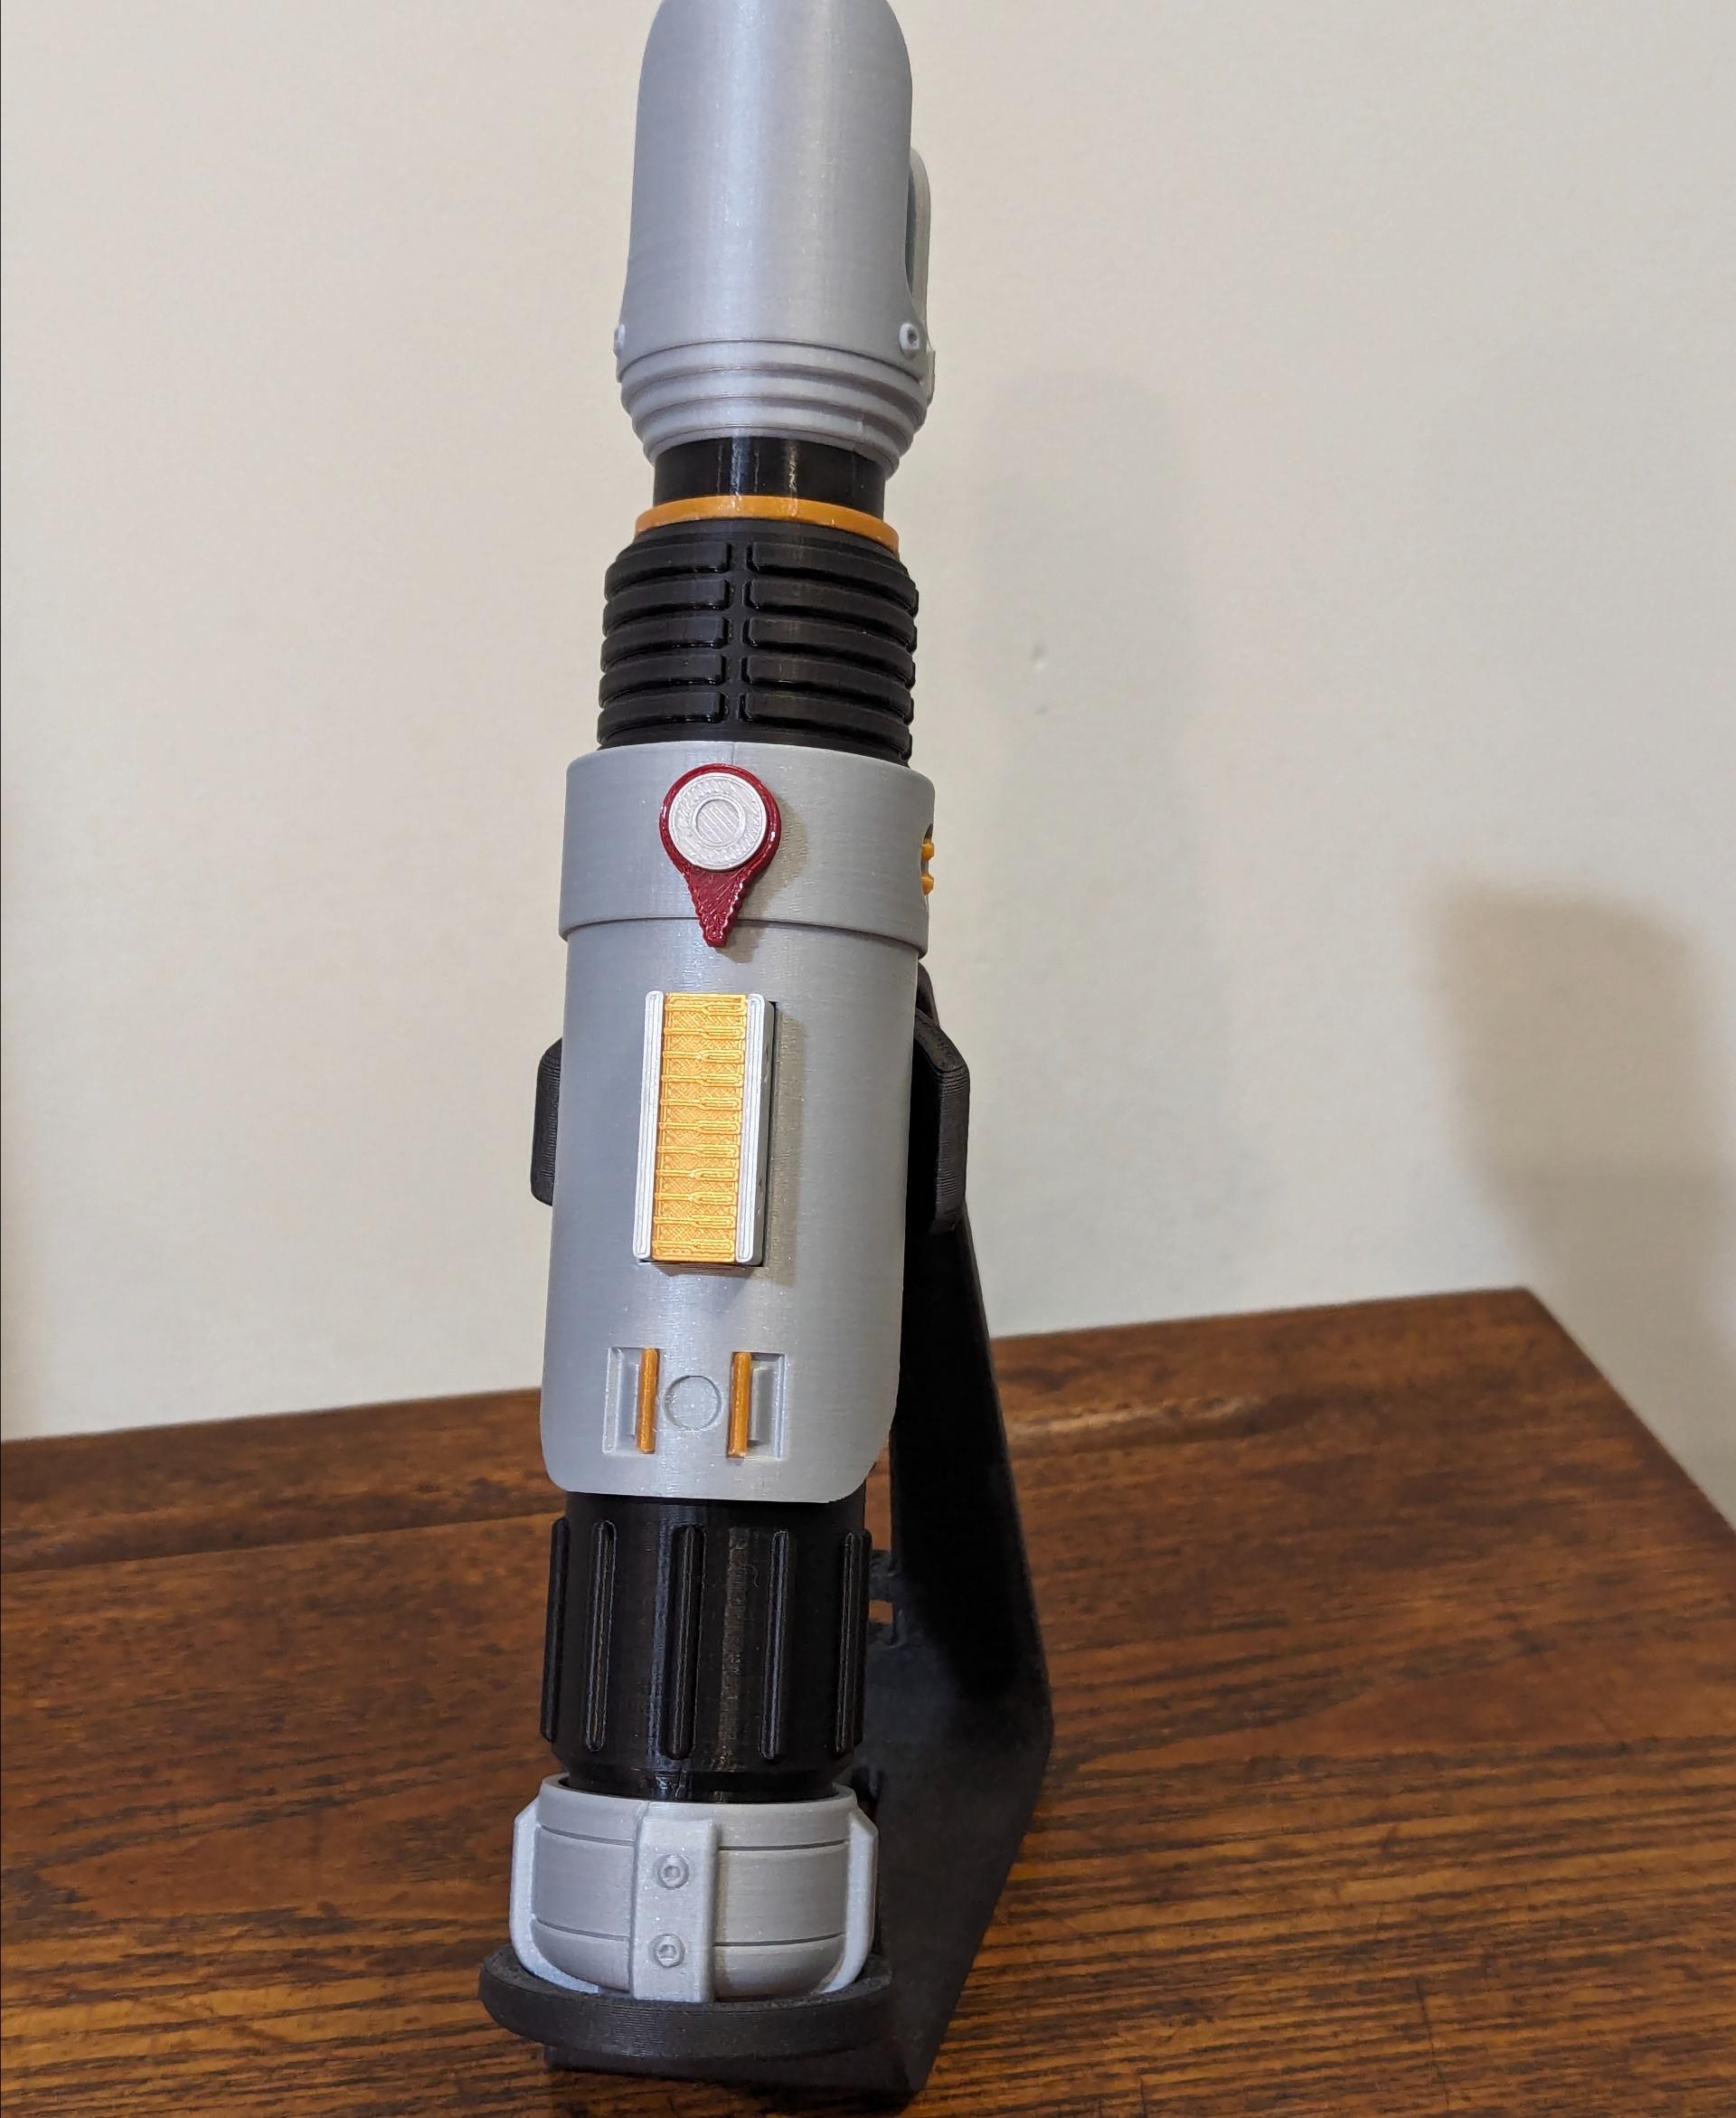 Sabine Wren’s Collapsing Lightsaber - Filaments used:

Polymaker_3D PolyLite Metallic Silver

PrintedSolid Black

AtomicFilament Dark Cherry Red and True Gold

ZIRO3DFILAMENT Transparent Green

Printed on Prusa MK3.5 - 3d model